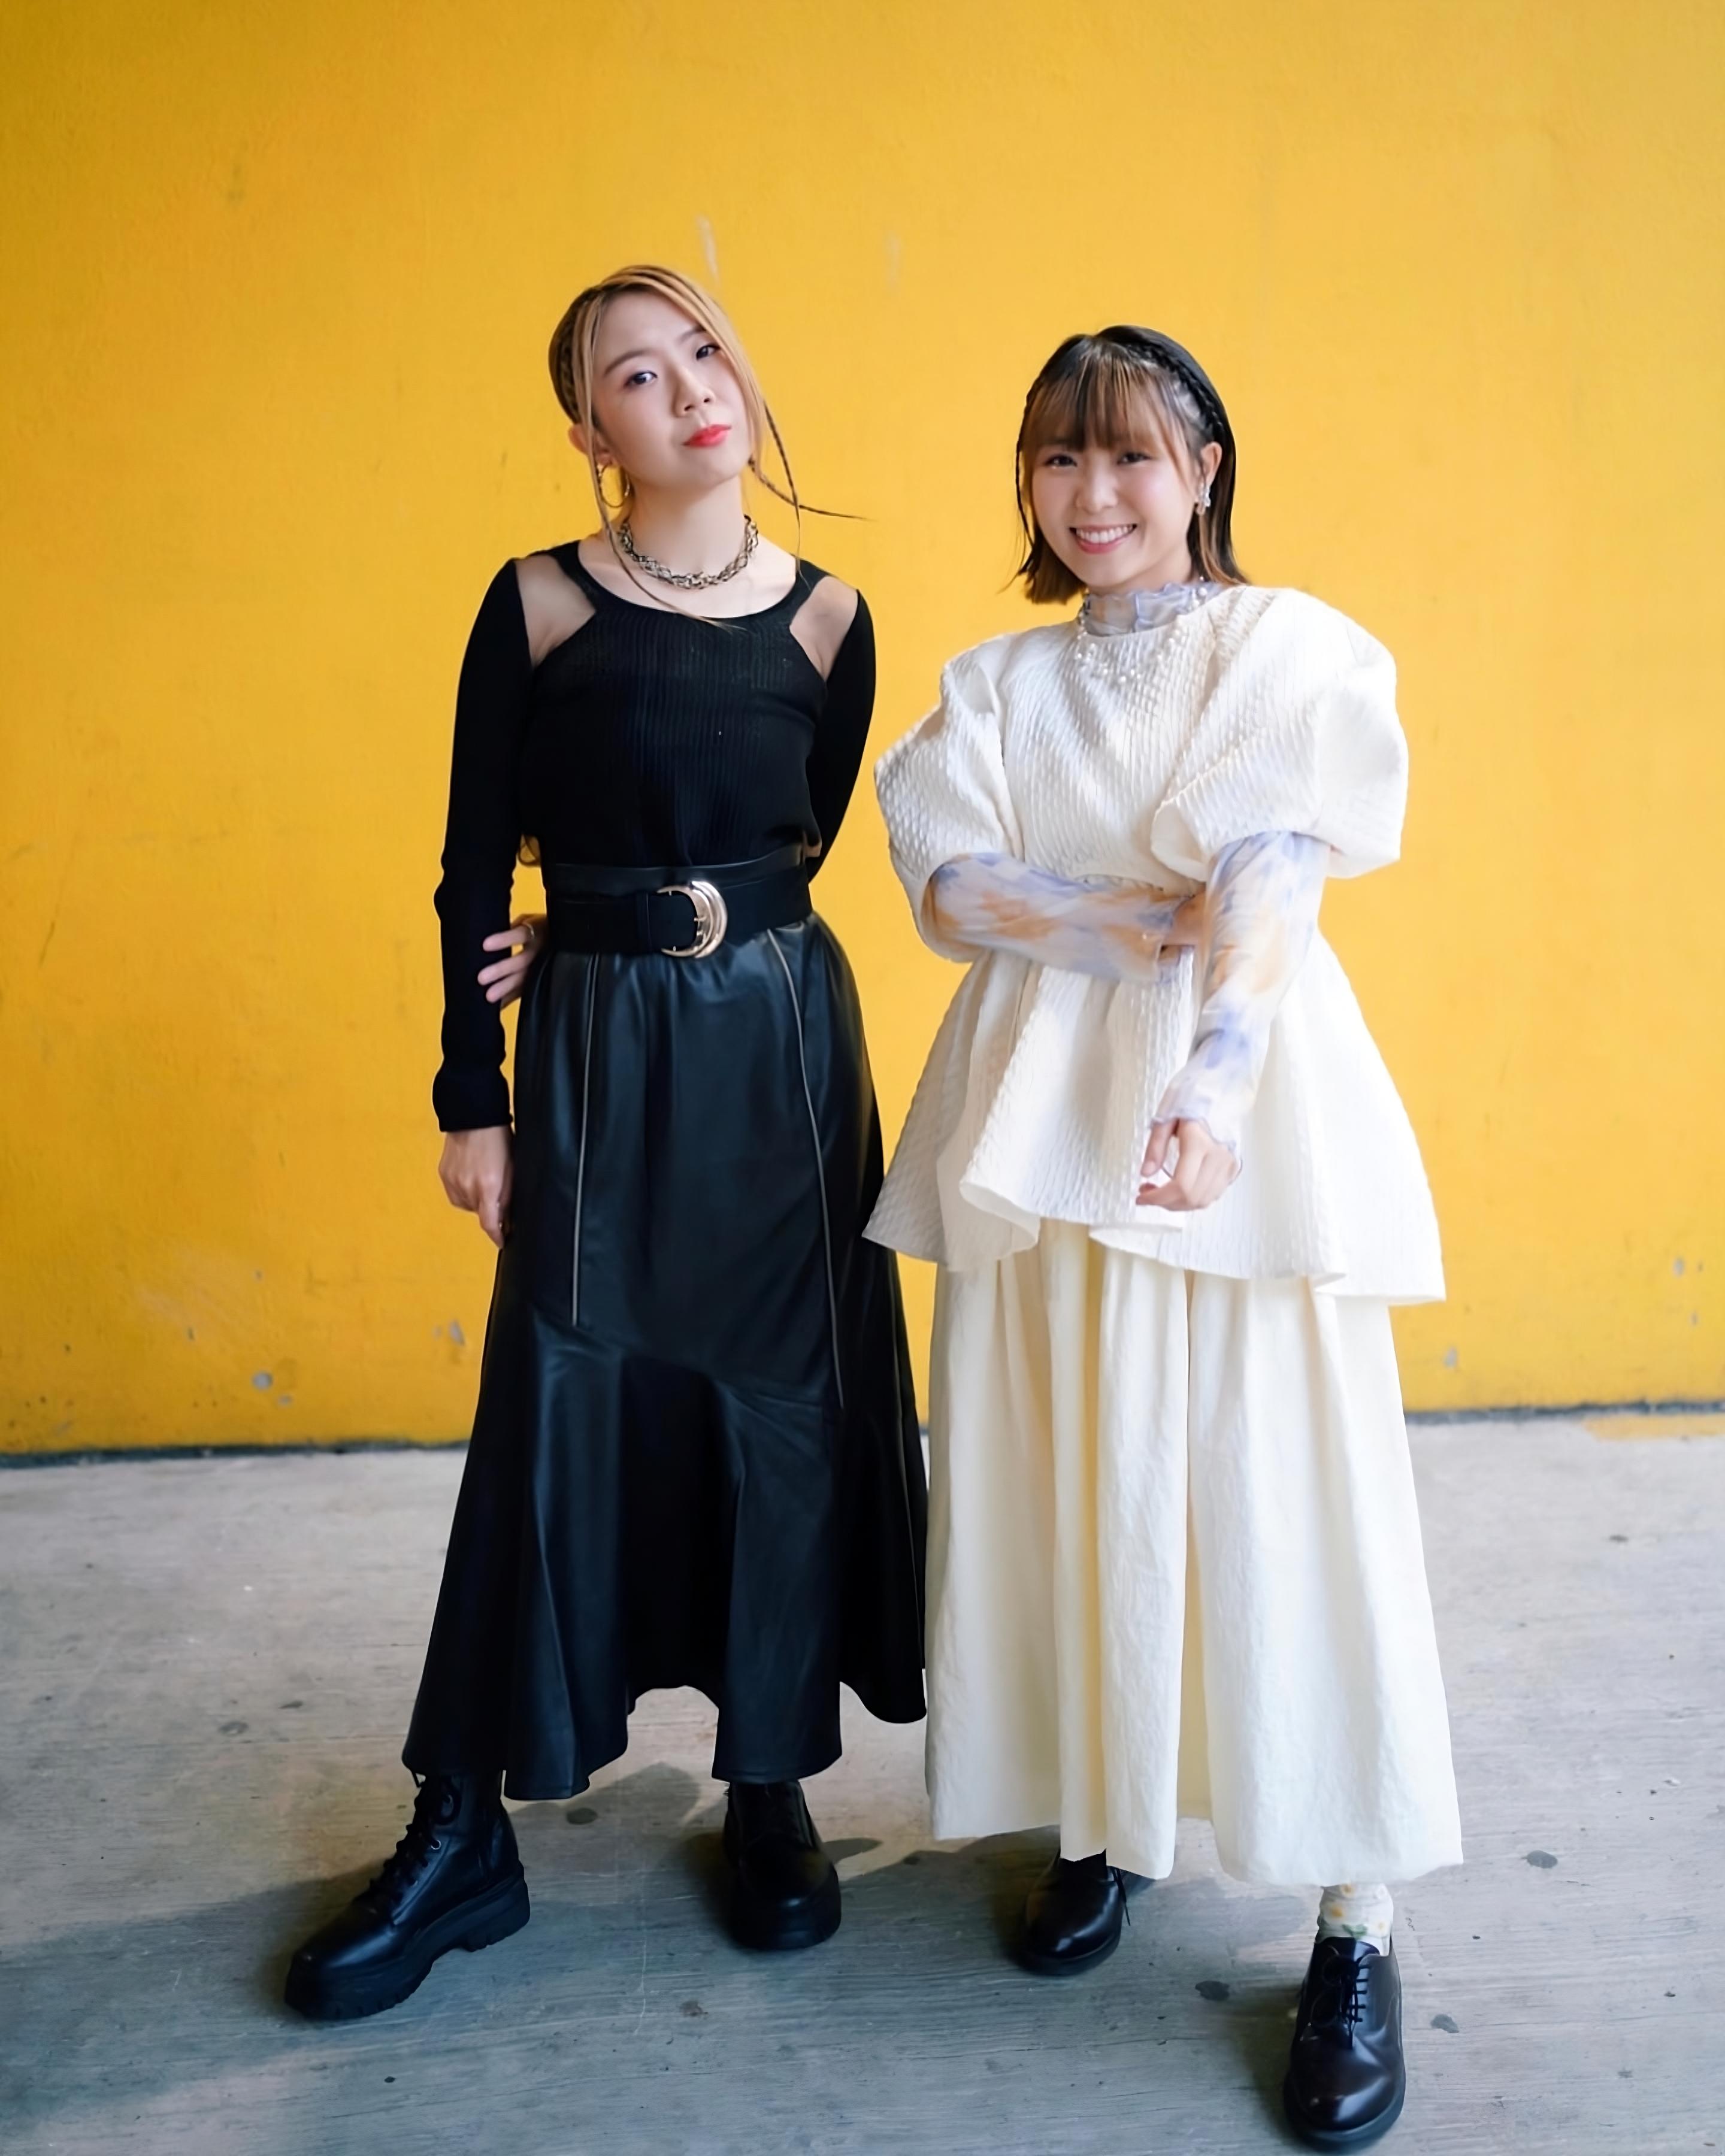 The Hong Kong Pop Culture Festival 2024: "ART!ON POP" concerts will be held in July at the Concert Hall of the Hong Kong Cultural Centre. Photo shows music makers Tse Chin-tung (left) and Tse Chin-lui (right).